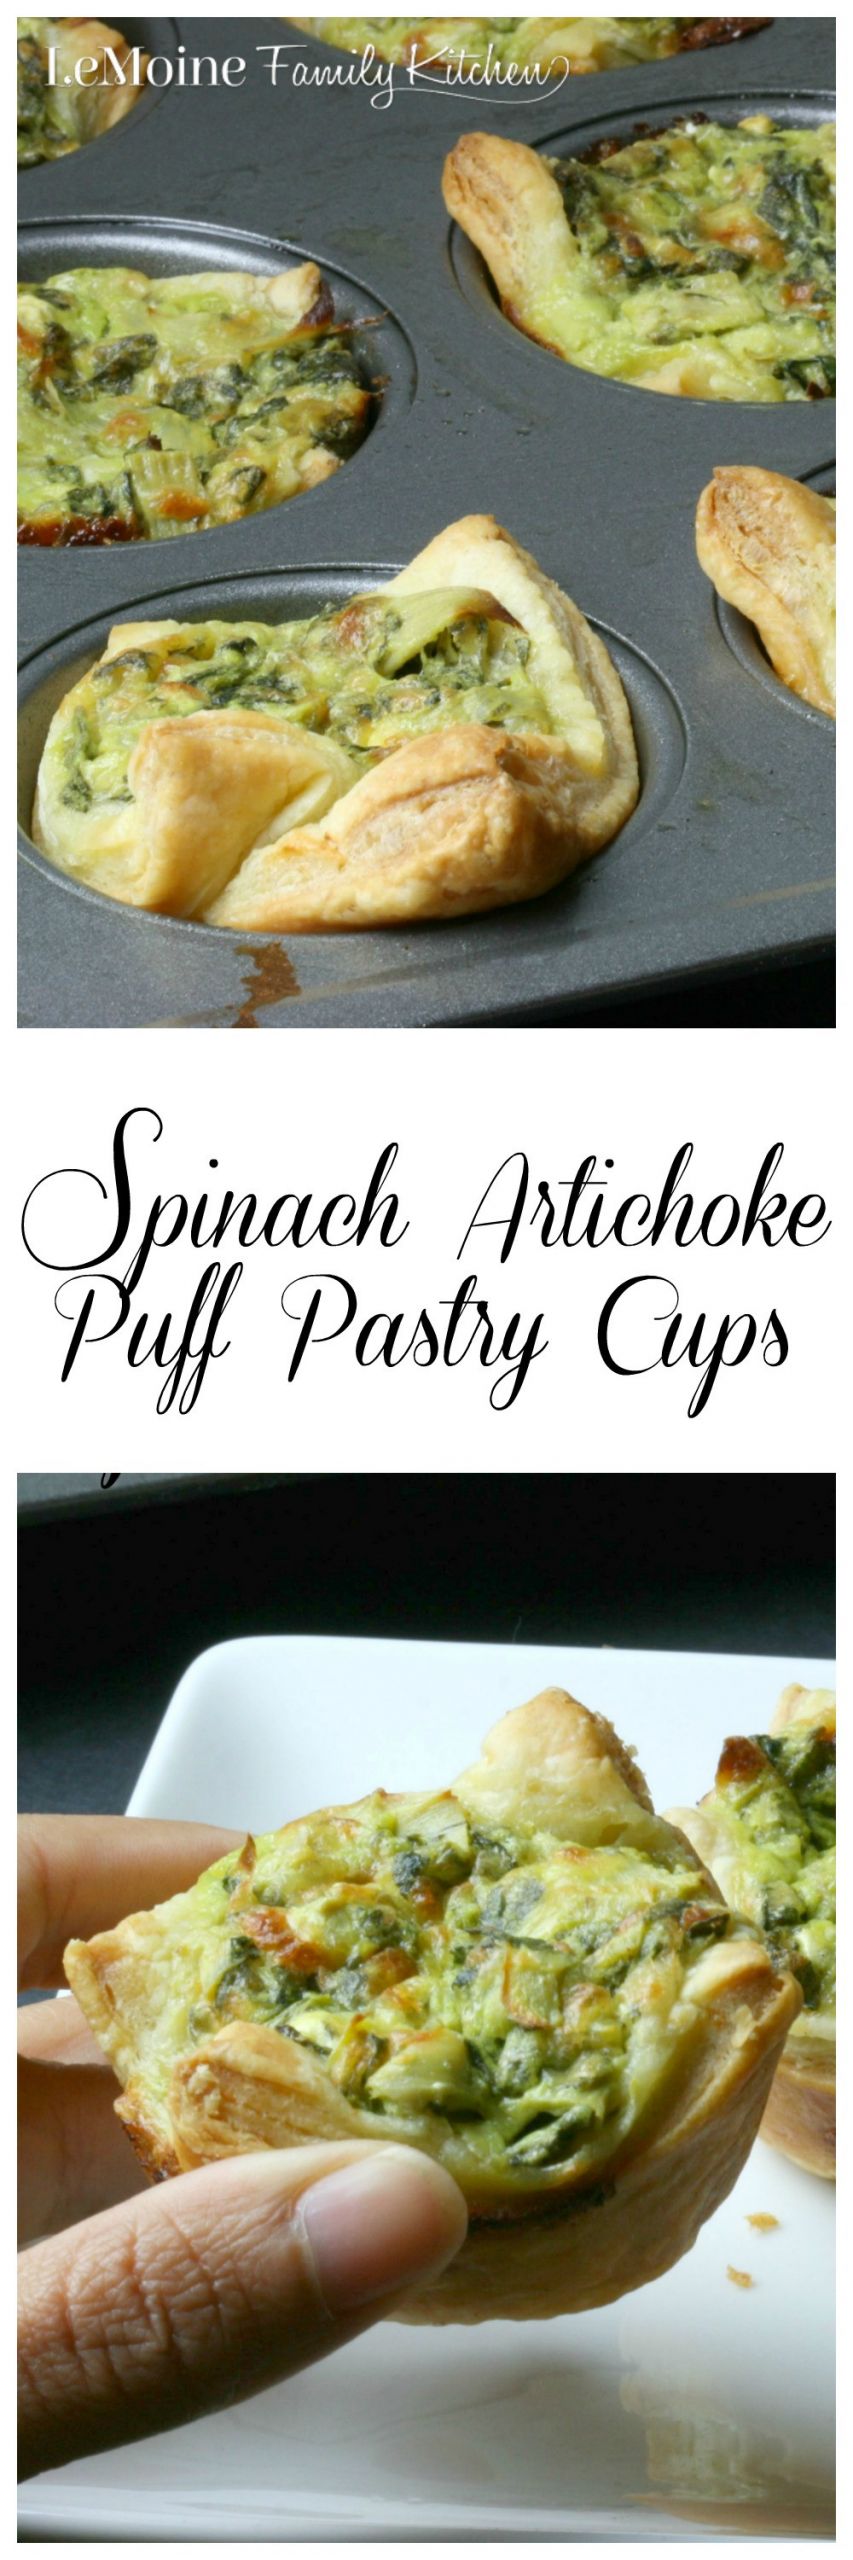 Puff Pastry Appetizers Recipes
 Spinach Artichoke Puff Pastry Cups LeMoine Family Kitchen